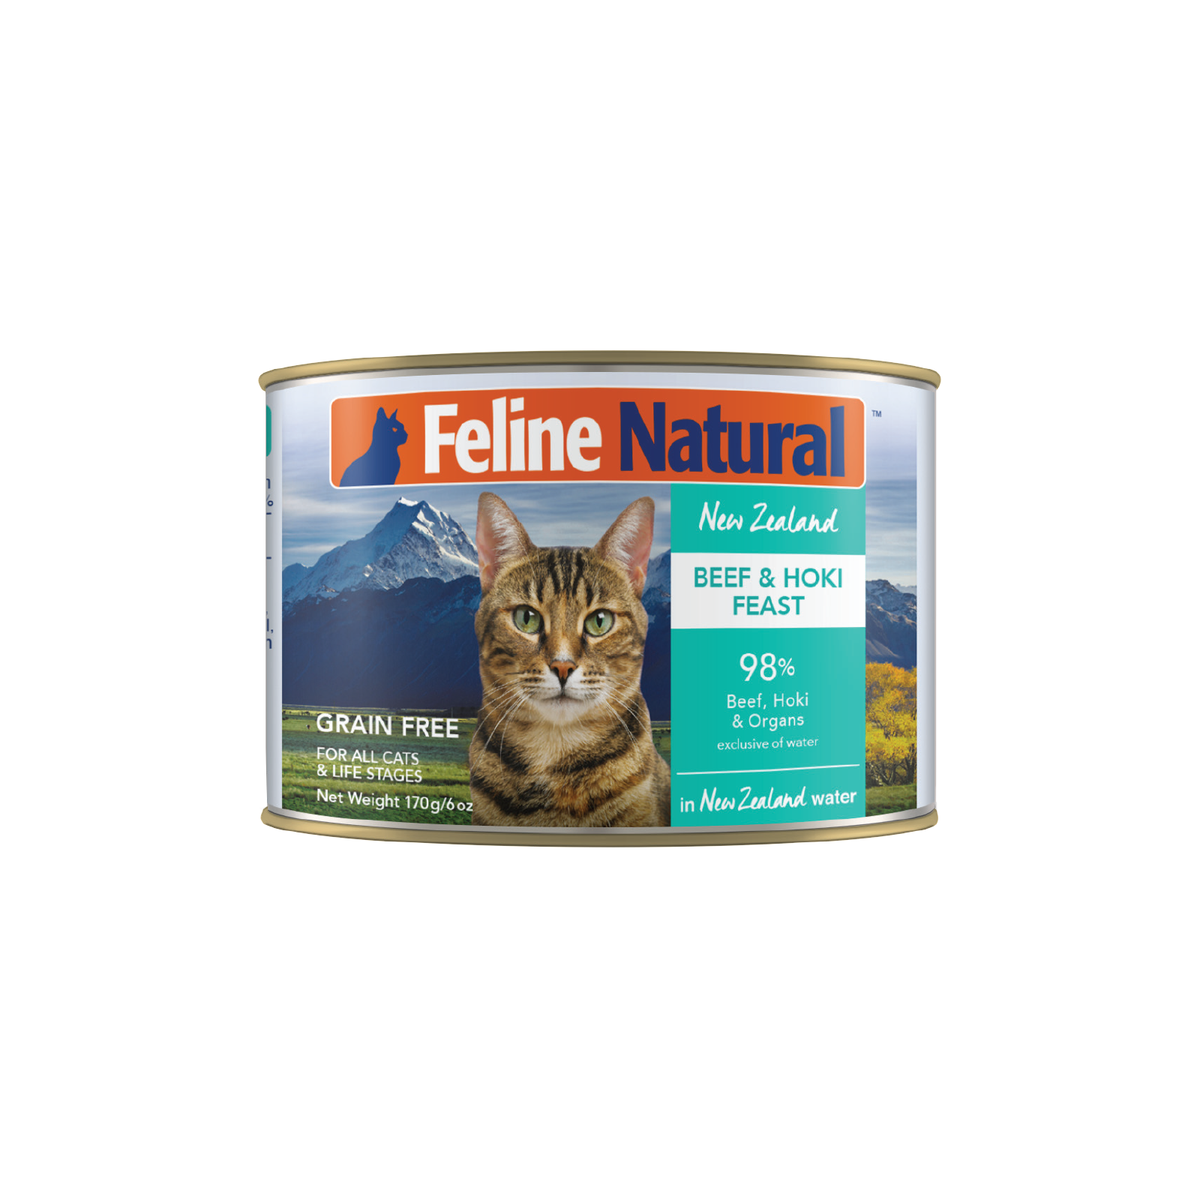 Feline Natural Beef and Hoki Feast Can Tray 12 x 170g